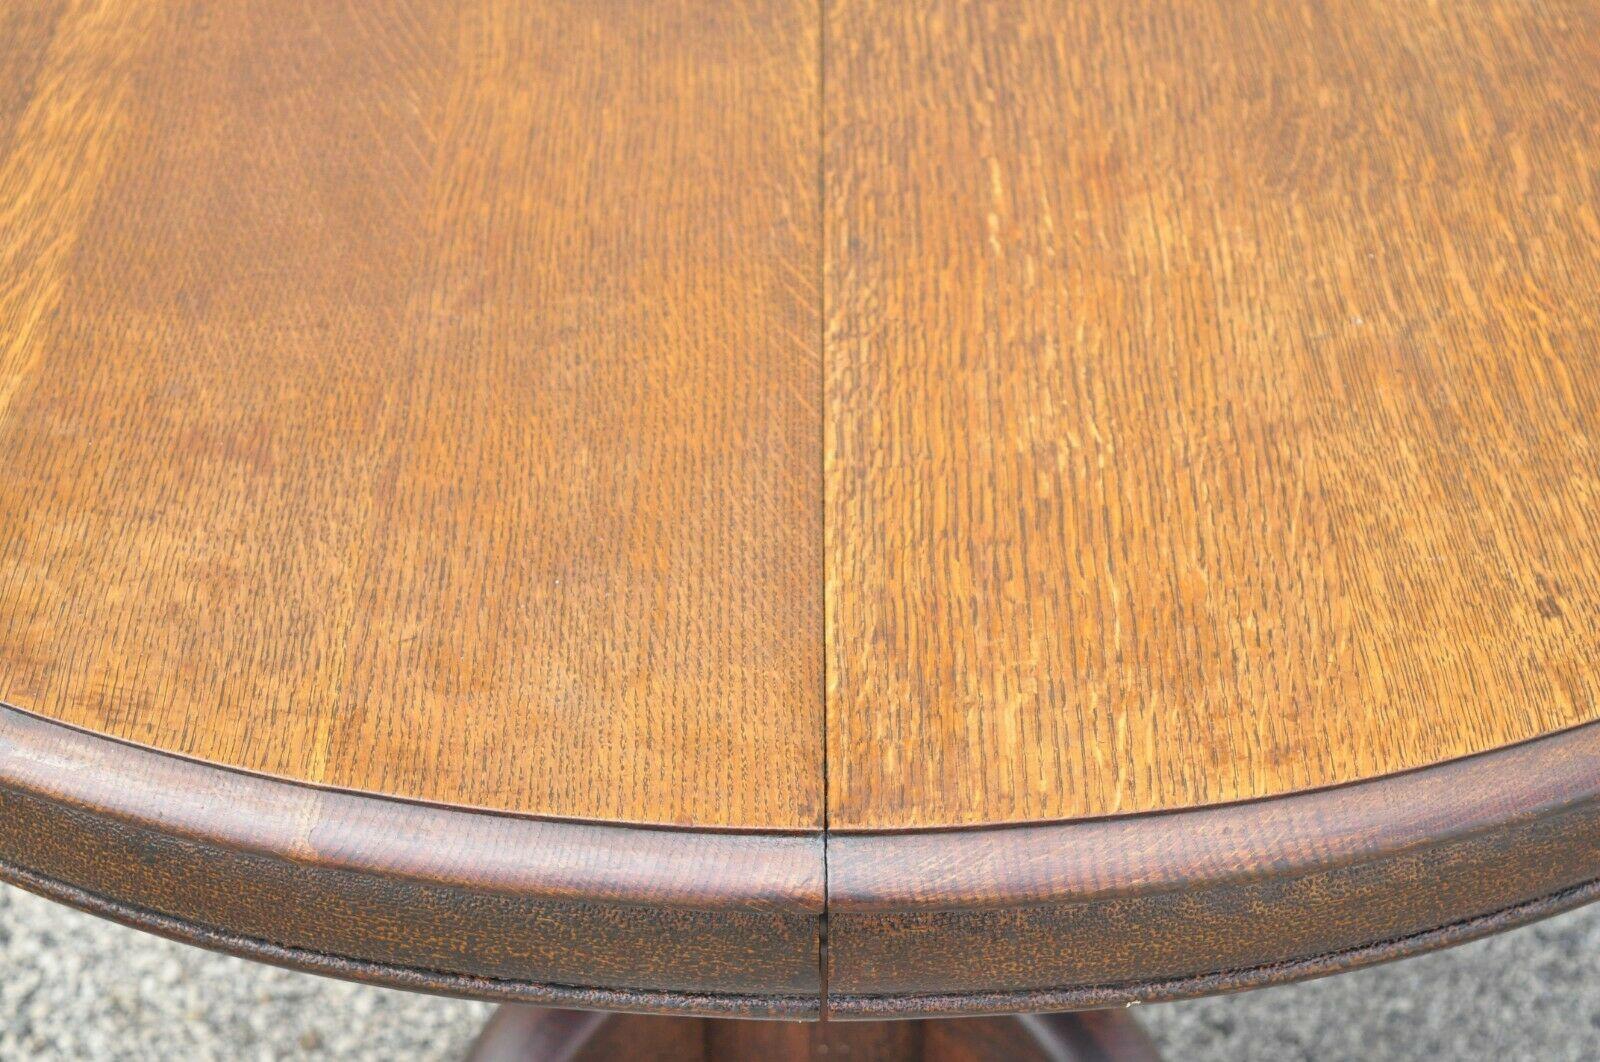 20th Century Hastings Table Co. American Empire 48